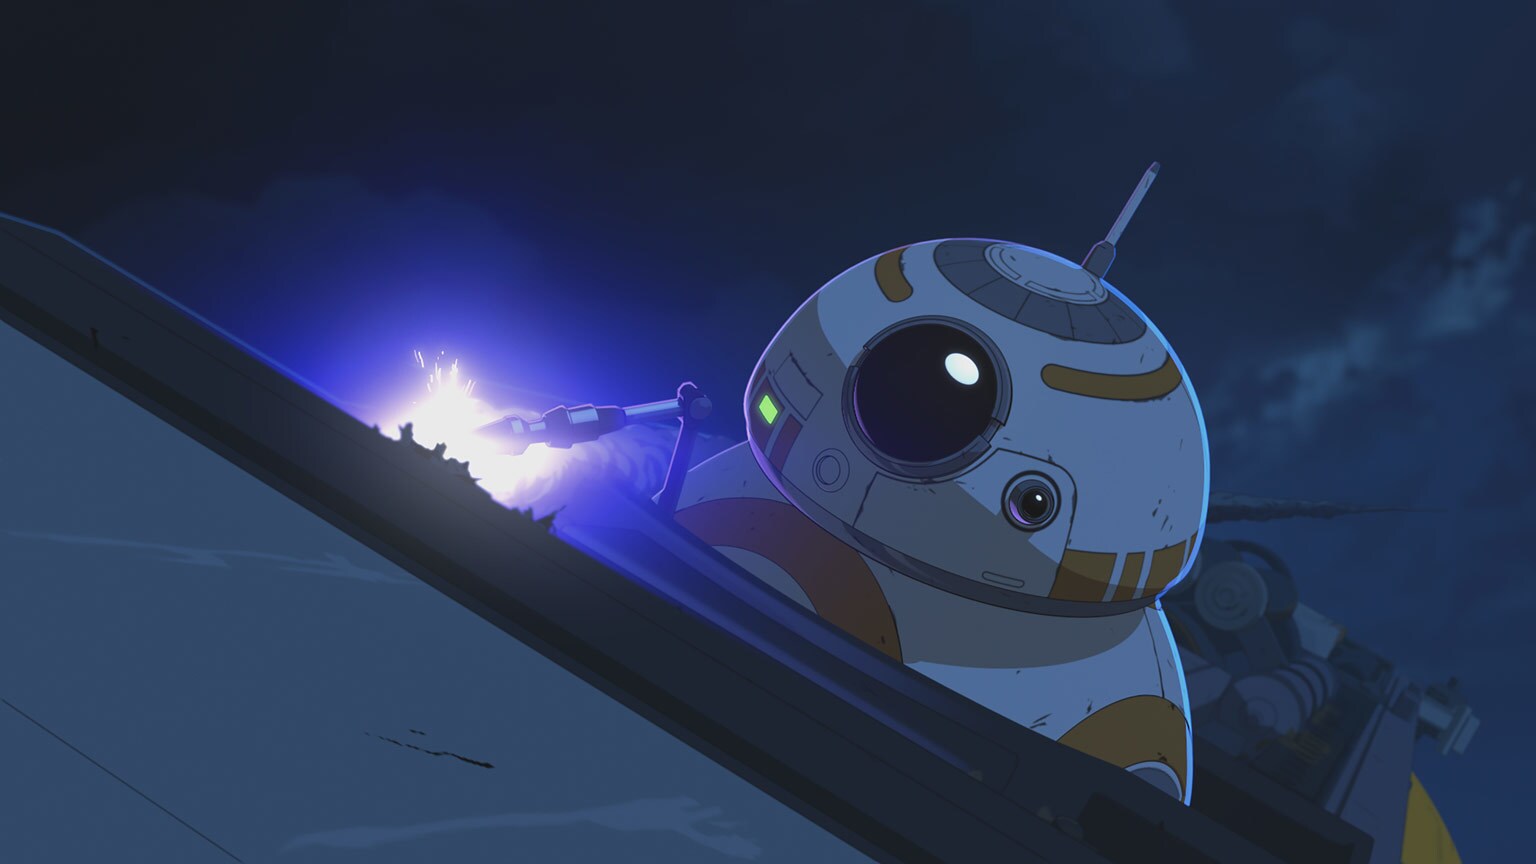 Bucket's List Extra: 7 Fun Facts from "The Doza Dilemma" - Star Wars Resistance